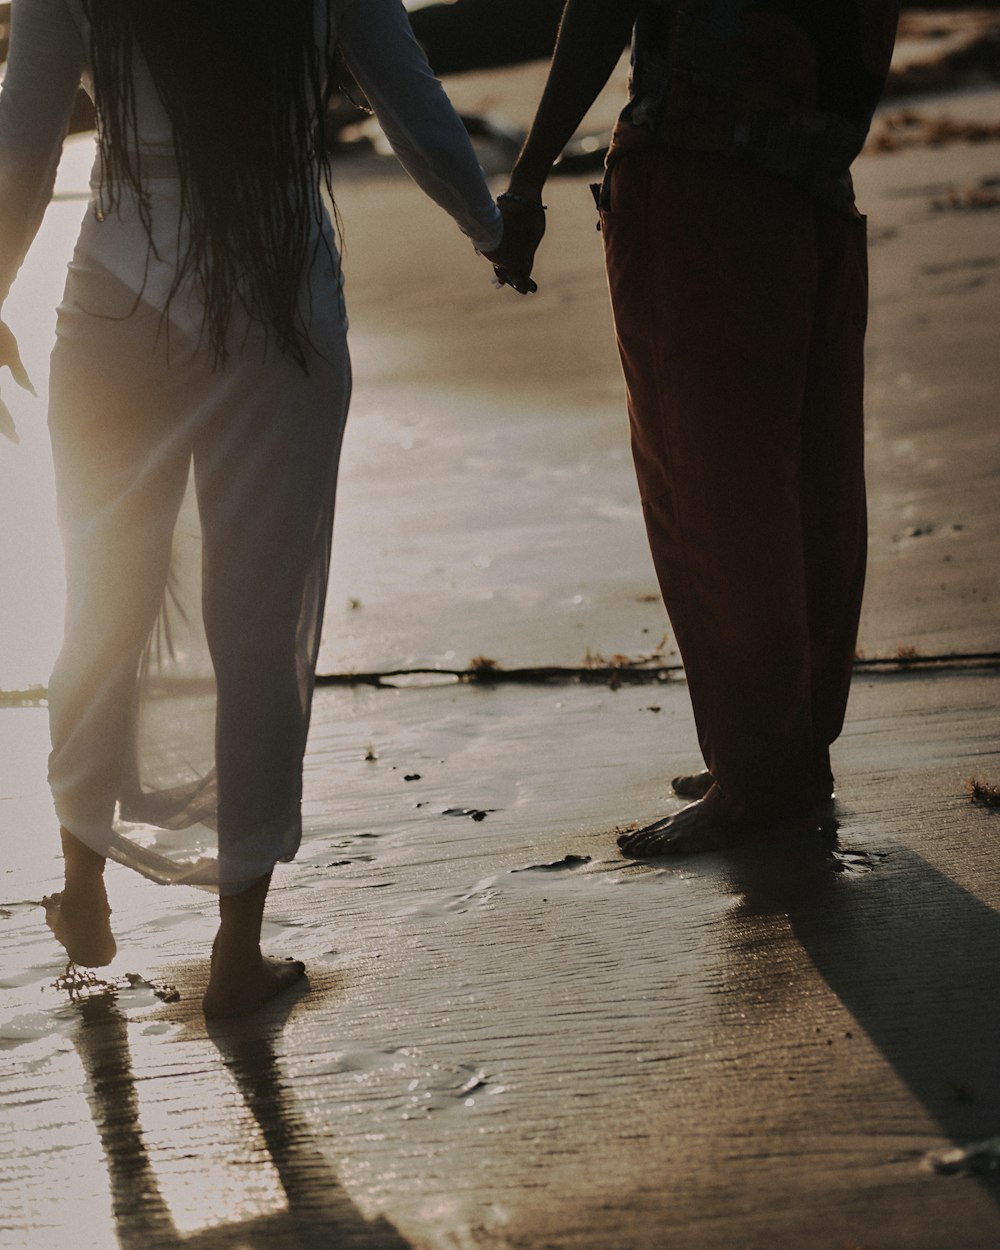 a man and a woman holding hands on the beach